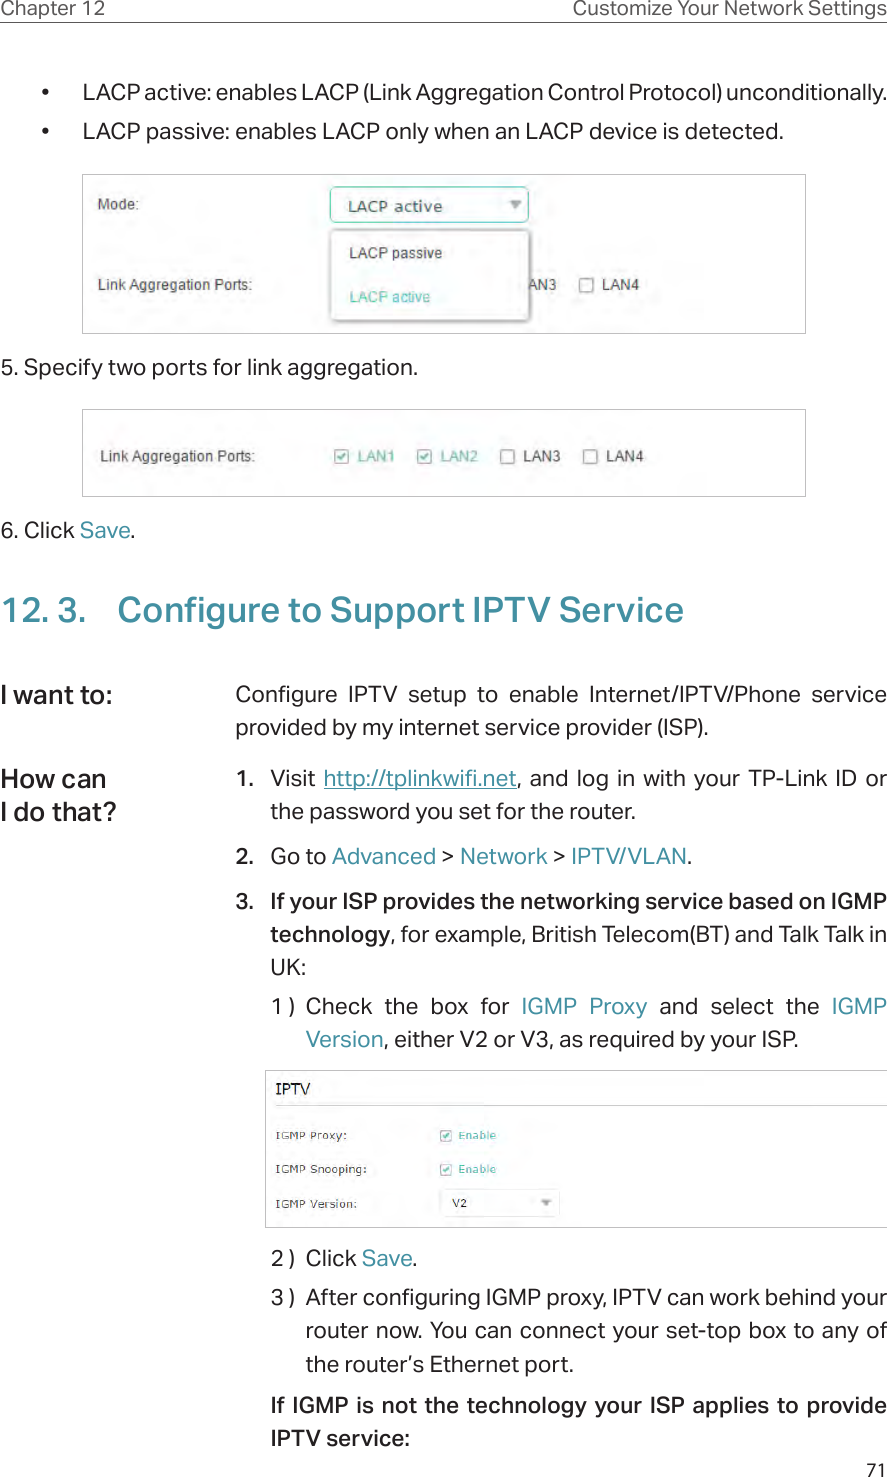 71Chapter 12 Customize Your Network Settings•  LACP active: enables LACP (Link Aggregation Control Protocol) unconditionally.•  LACP passive: enables LACP only when an LACP device is detected.5. Specify two ports for link aggregation.6. Click Save.12. 3.  Configure to Support IPTV ServiceConfigure IPTV setup to enable Internet/IPTV/Phone service provided by my internet service provider (ISP).1.  Visit http://tplinkwifi.net, and log in with your TP-Link ID or the password you set for the router.2.  Go to Advanced &gt; Network &gt; IPTV/VLAN.3.  If your ISP provides the networking service based on IGMP technology, for example, British Telecom(BT) and Talk Talk in UK:1 ) Check the box for IGMP Proxy and select the IGMP Version, either V2 or V3, as required by your ISP.2 )  Click Save.3 )  After configuring IGMP proxy, IPTV can work behind your router now. You can connect your set-top box to any of the router’s Ethernet port.If IGMP is not the technology your ISP applies to provide IPTV service:I want to:How can I do that?